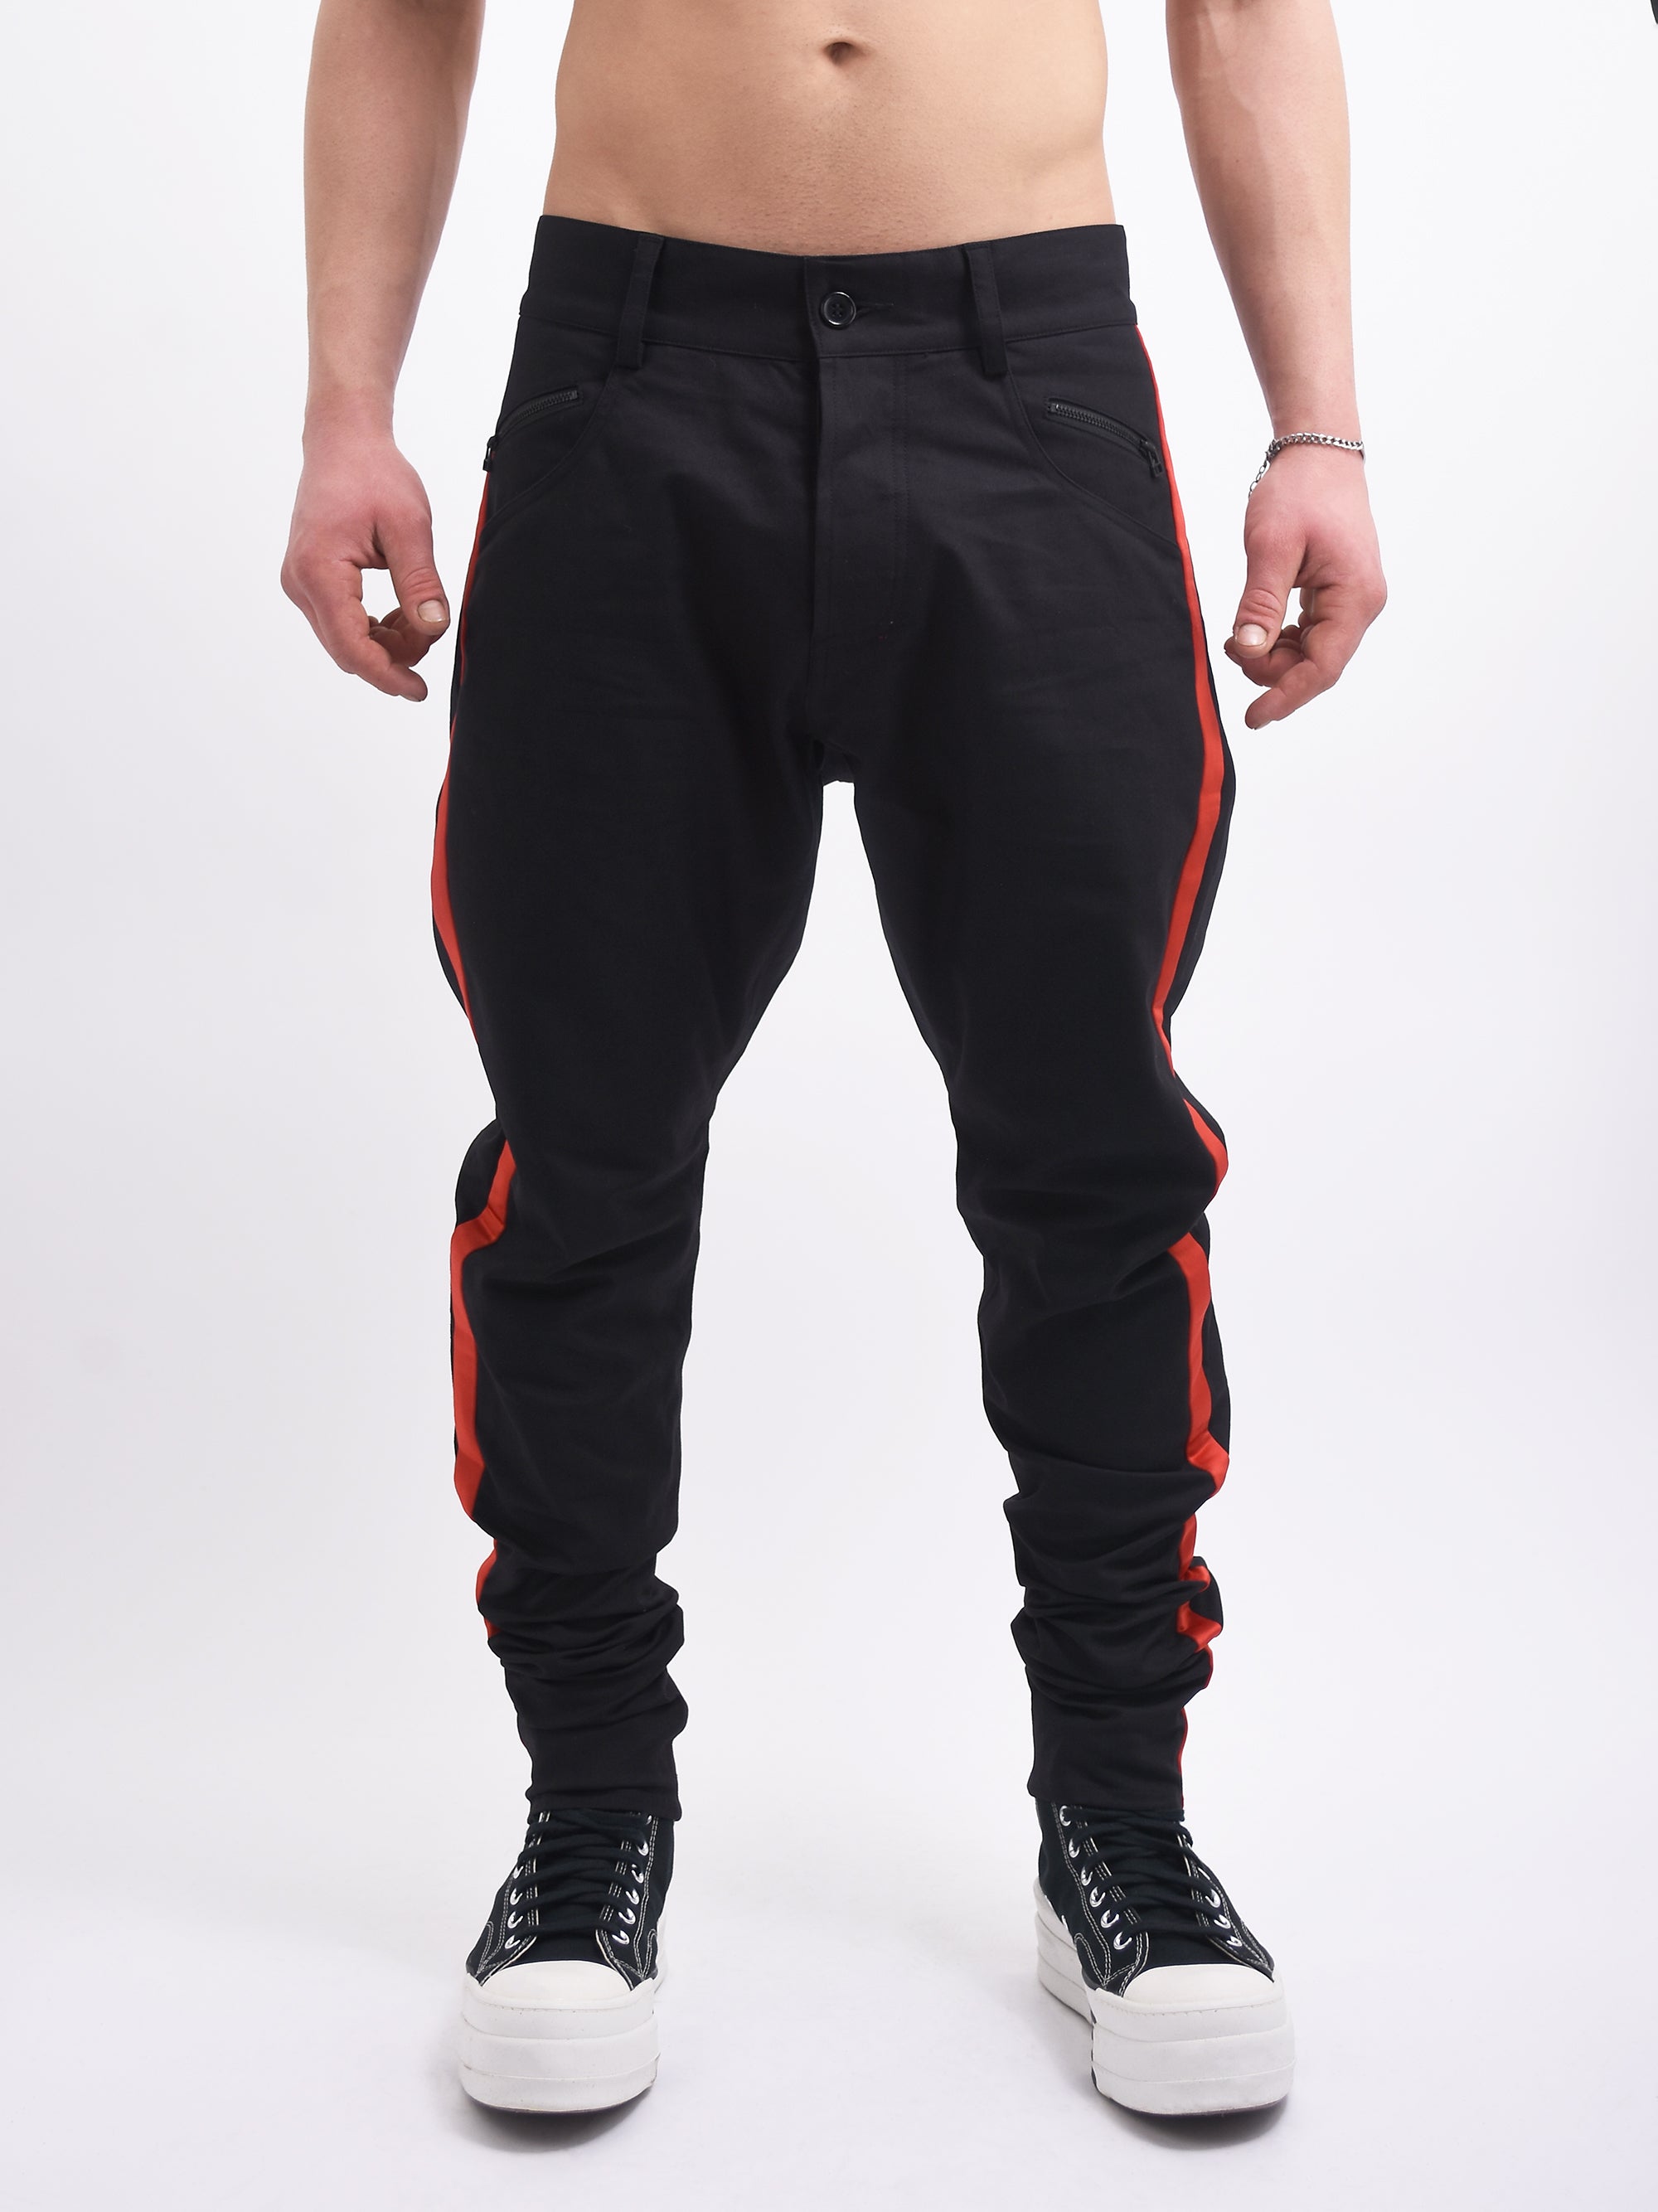 BLACK JEANS WITH RED SATIN SIDE STRIPE